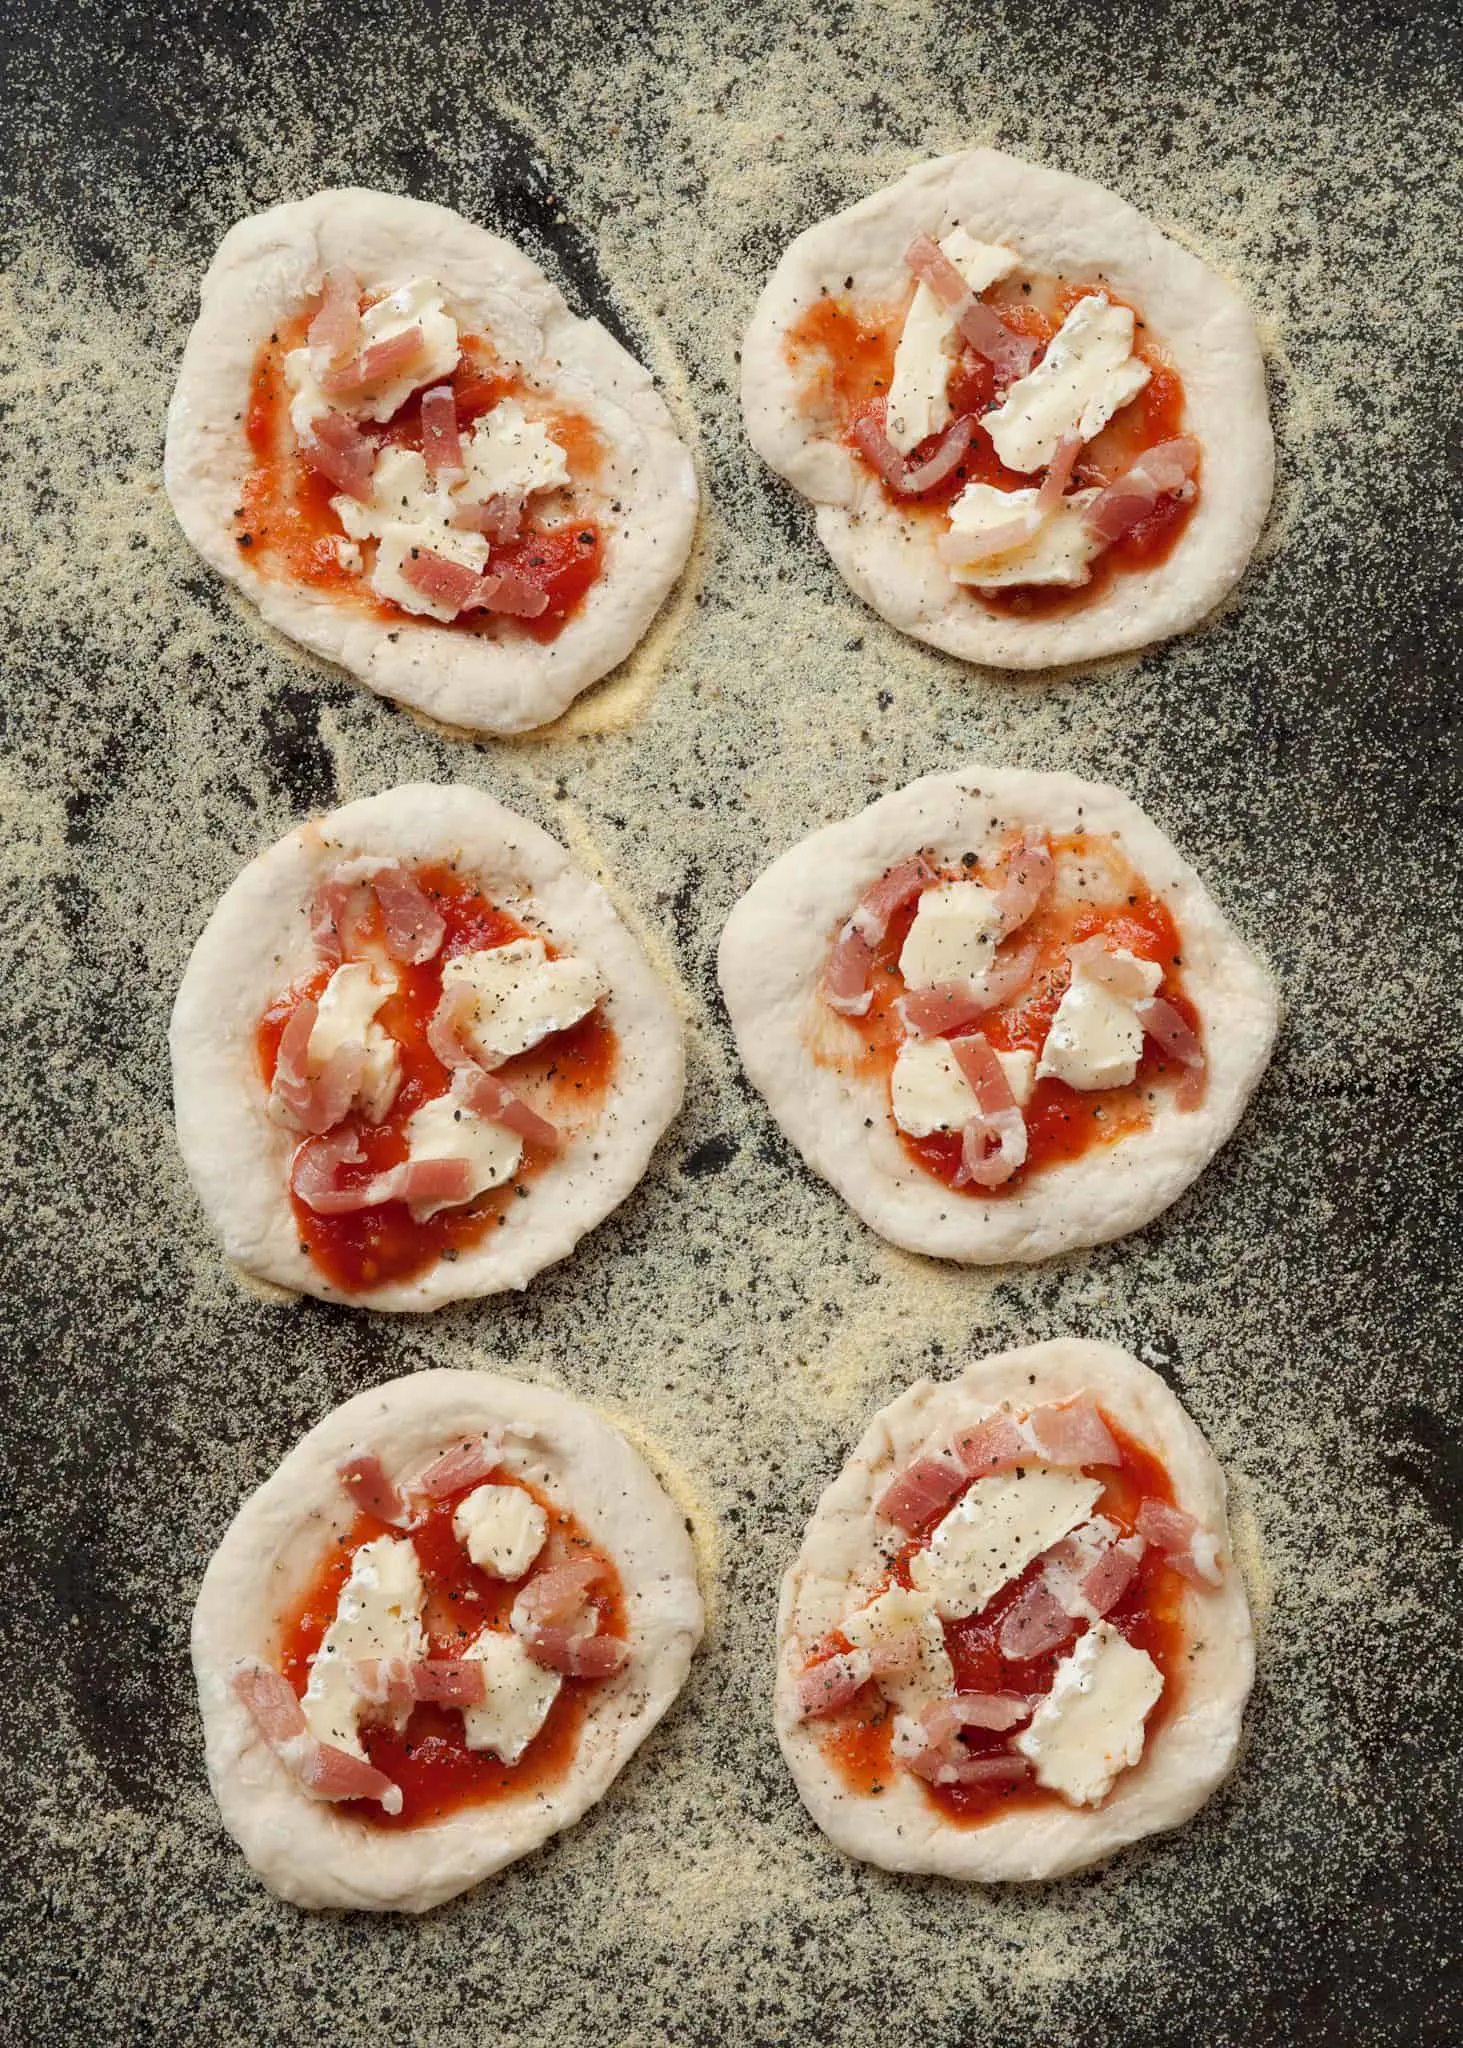 Try these Bacon Brie Basil Mini Pizzas for Game Day! #gameday #appetizer #pizza #fingerfood